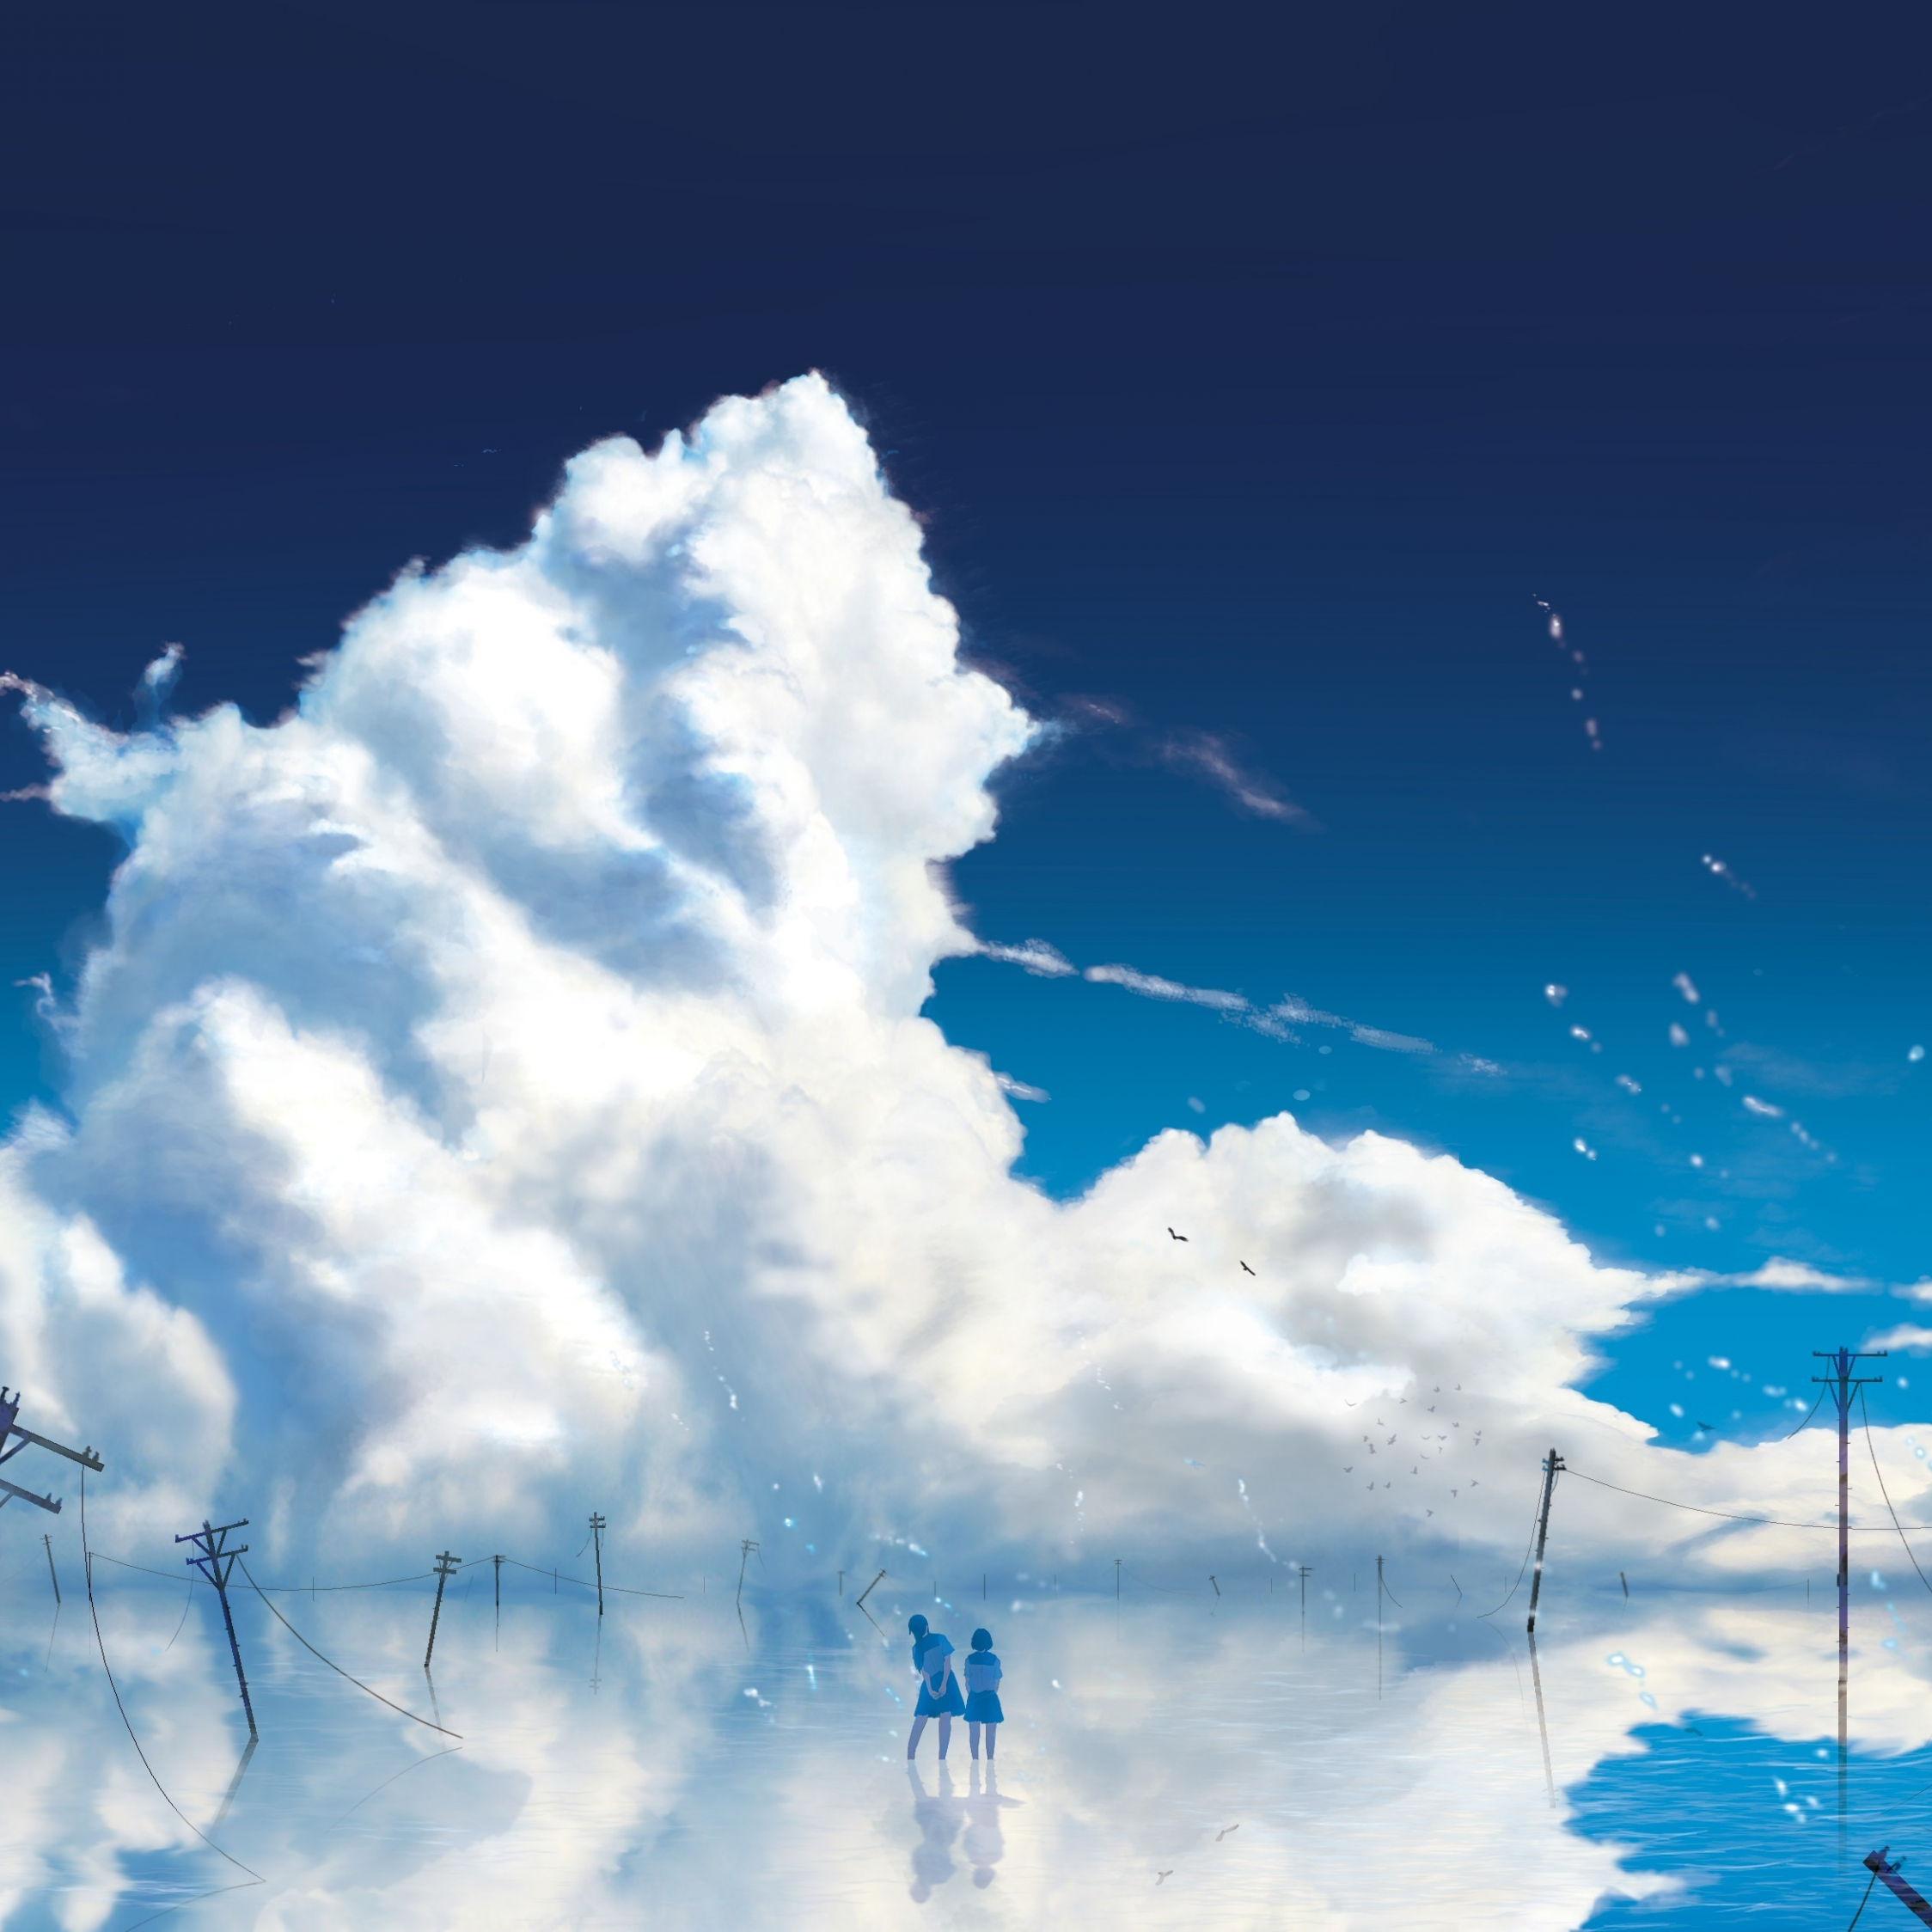 Download 2248x2248 Wallpaper Anime Girls Outdoor Clouds Ipad Air Ipad Air 2 Ipad 3 Ipad 4 Ipad Mini 2 Ipad Mini 3 2248x2248 Hd Image Background 15